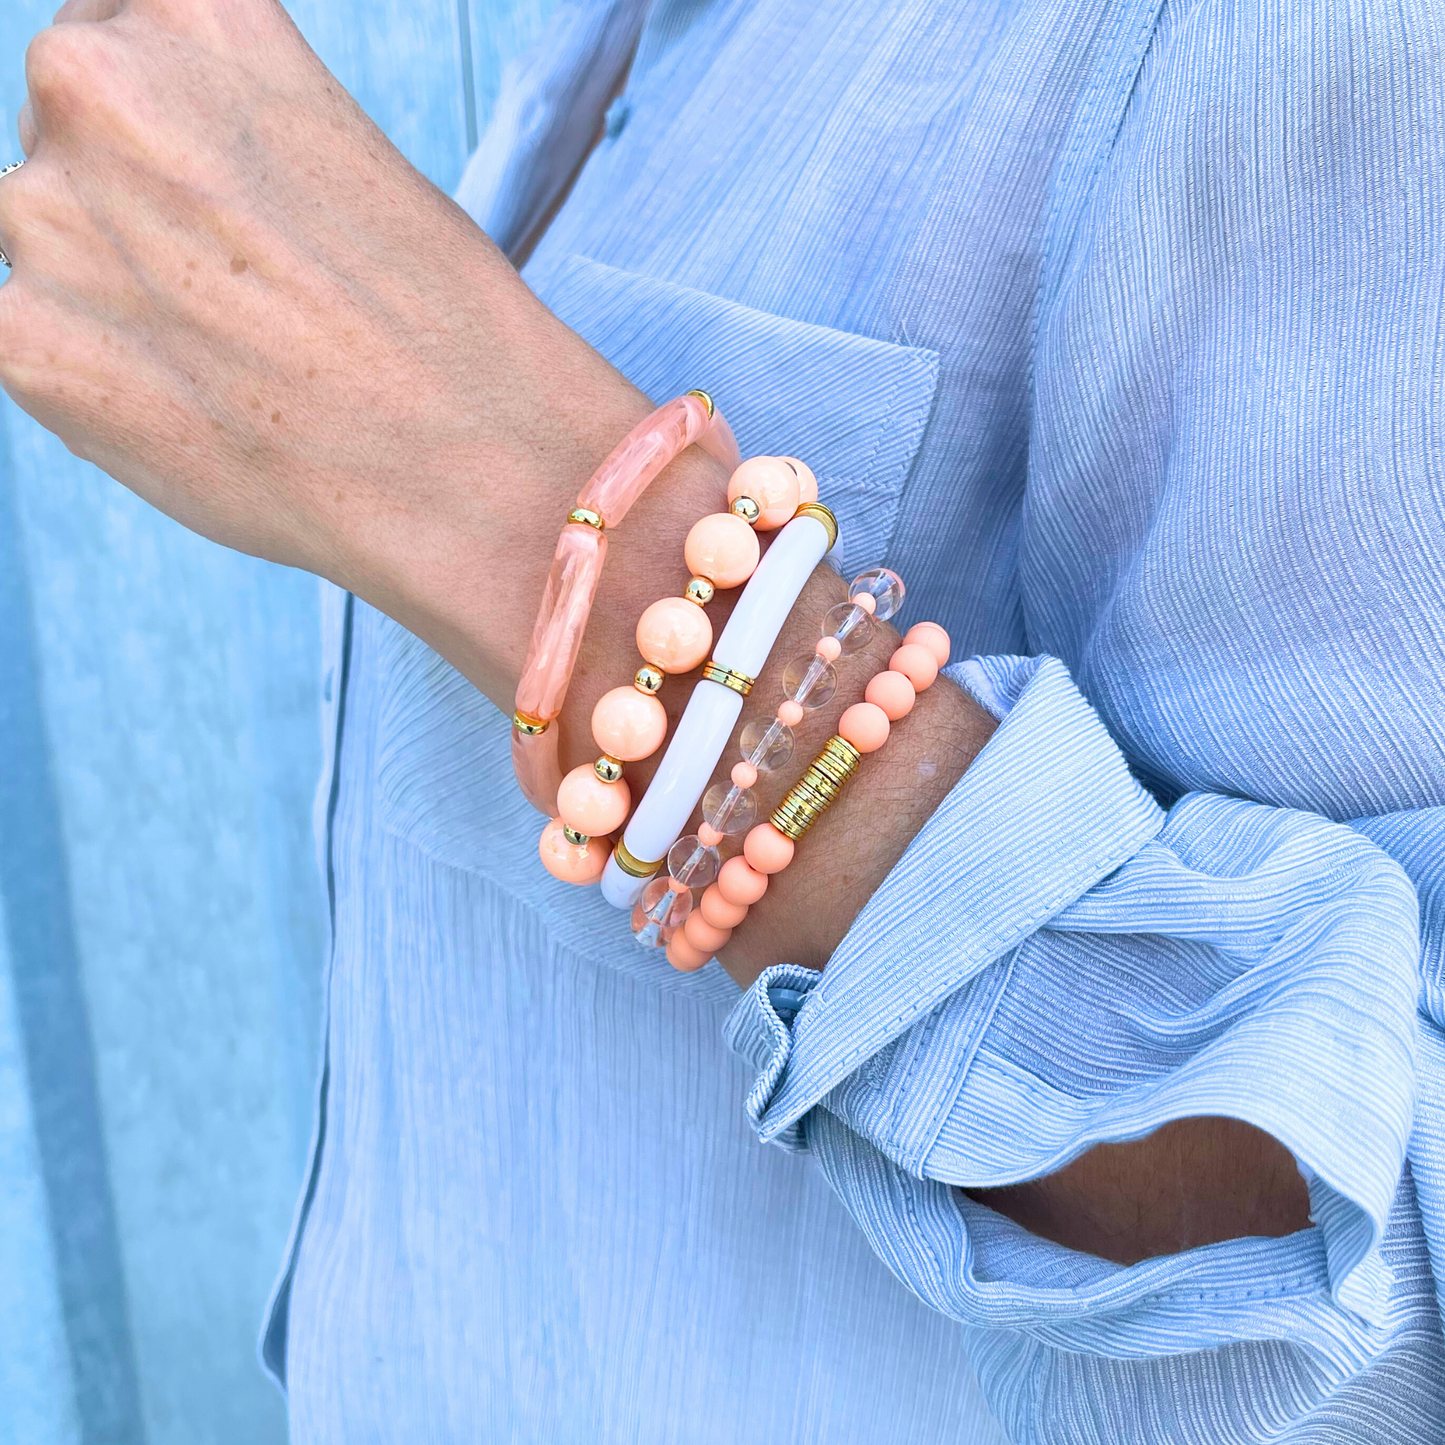 Model wearing 5-peice peach golden hour bracelet stack. This bracelet stack has two 8mm skinny bamboo acrylic tube bangles; peach marble and white. Clear 6mm quartz round beads with alternating 4mm peach acrylic beads. 12mm chunky acrylic round beads with alternating gold filled round beads. And also designed with 6mm peach acrylic round beads with gold plated flats.